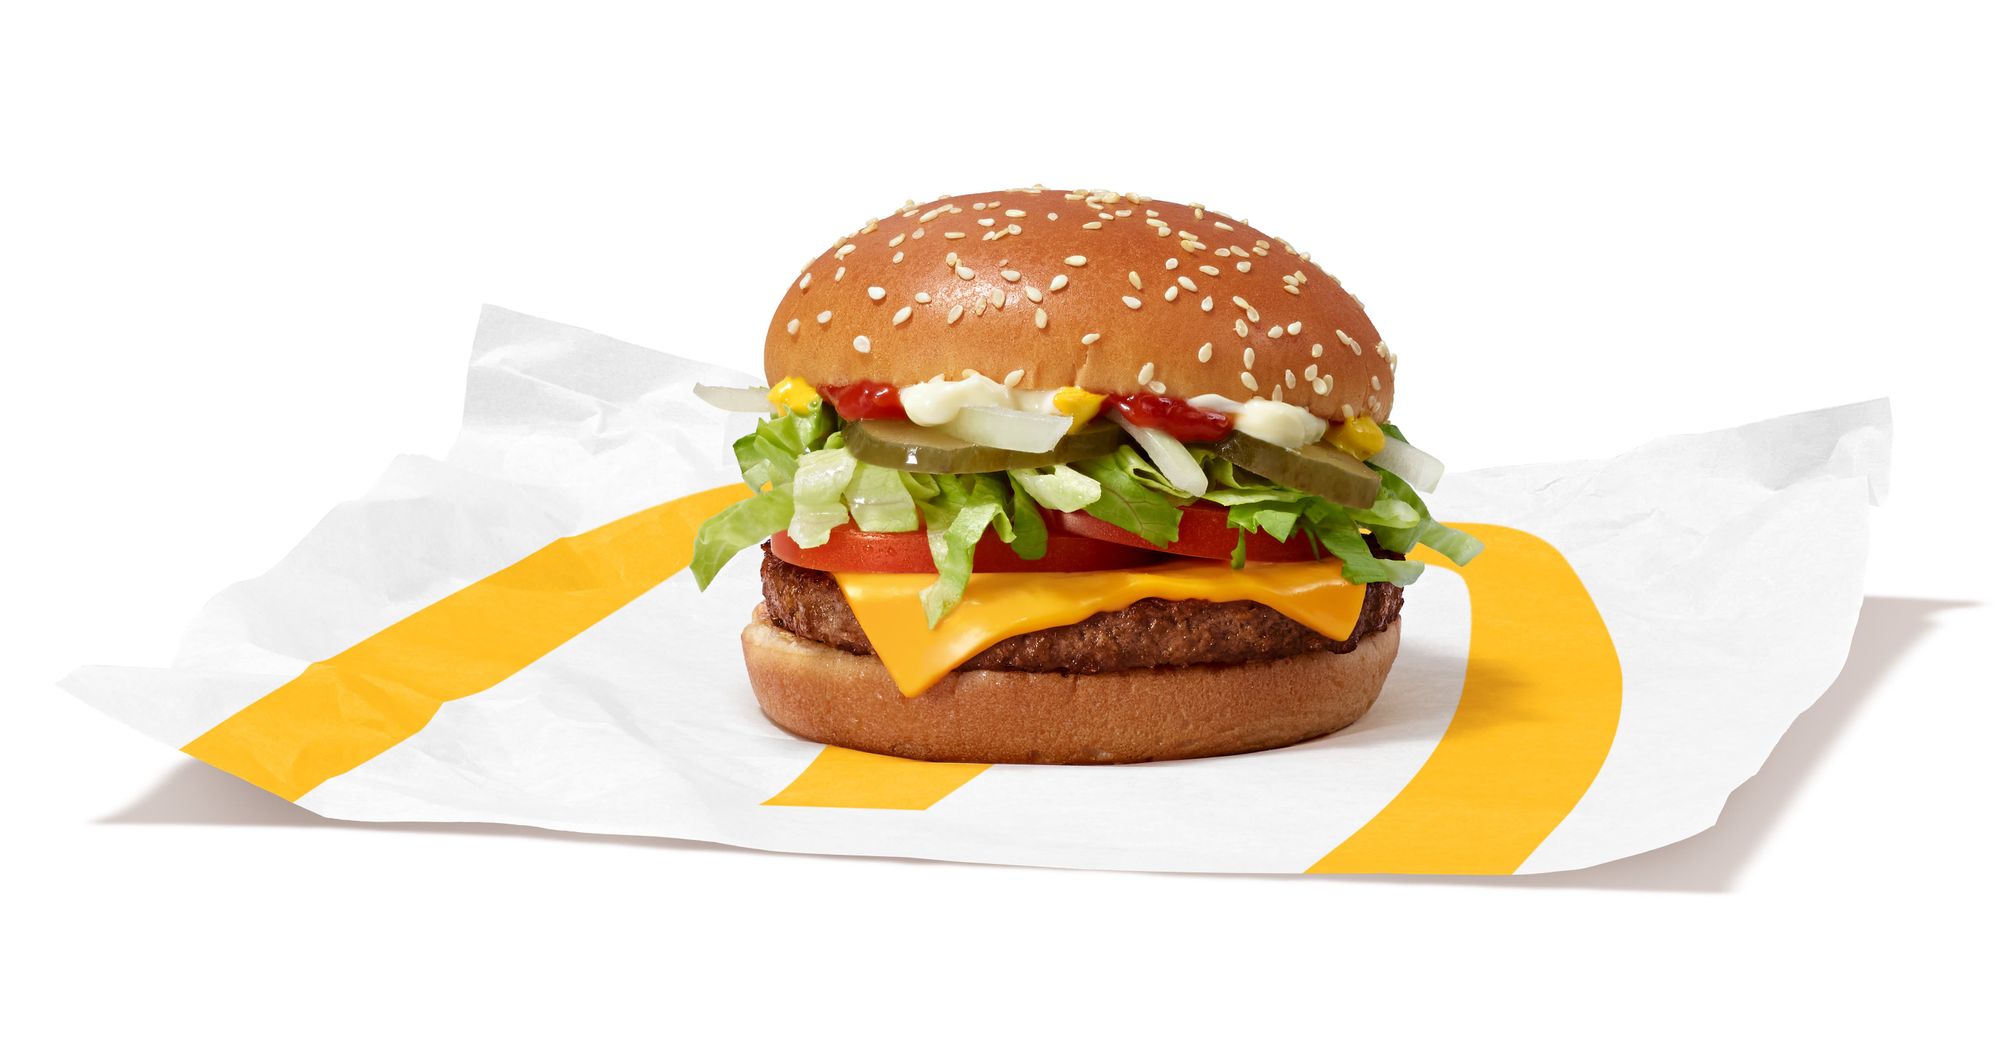 McDonald's expanding test of the "McPlant" to more U.S. stores